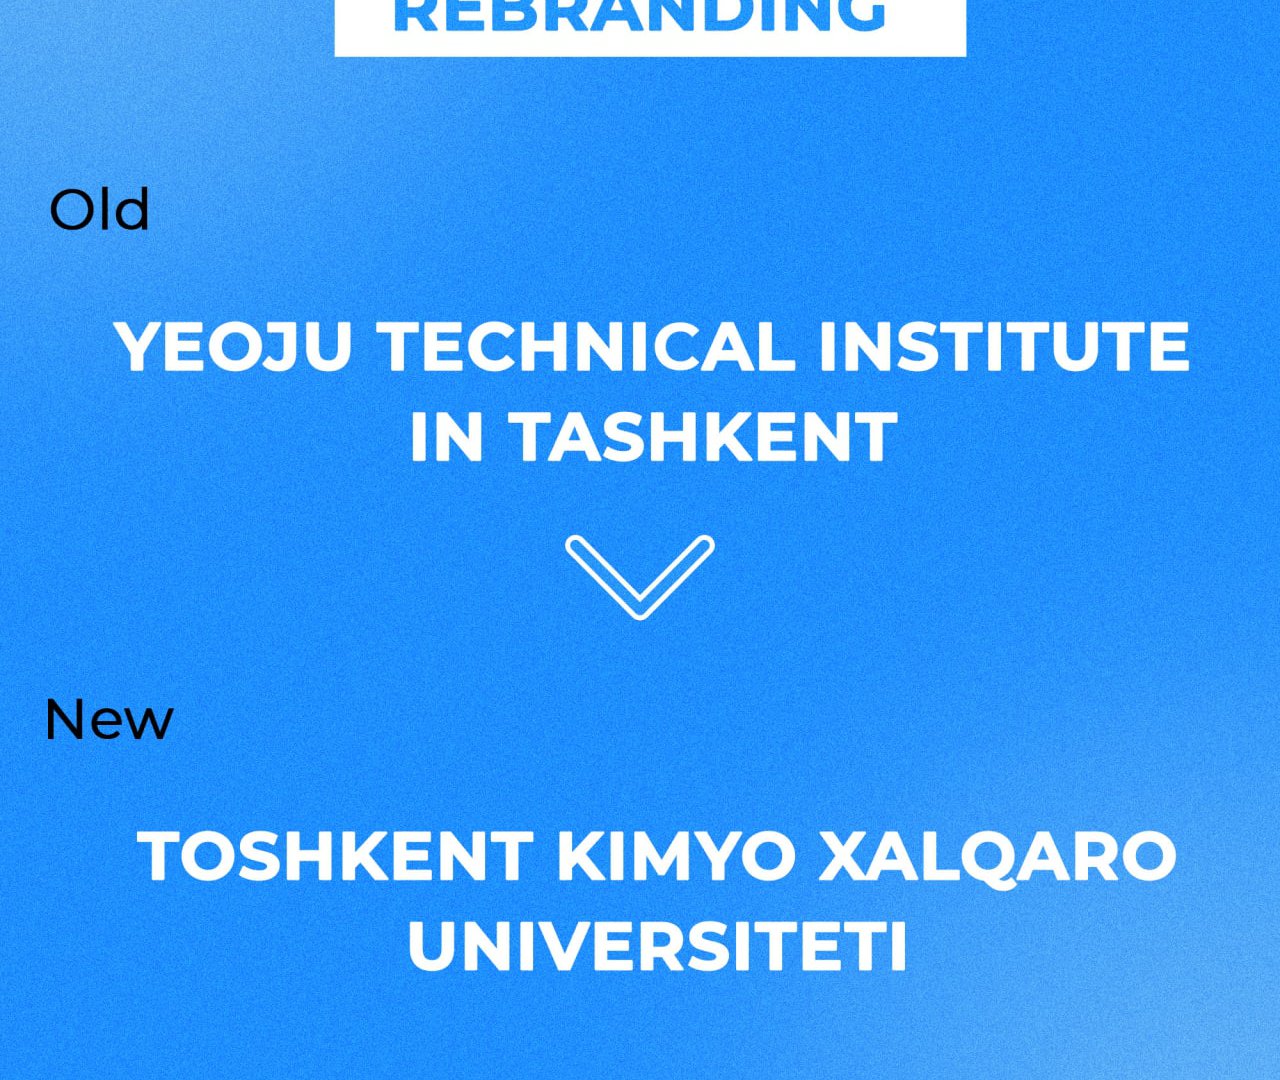 The Yeoju Technical Institute in Tashkent was given the status of a university